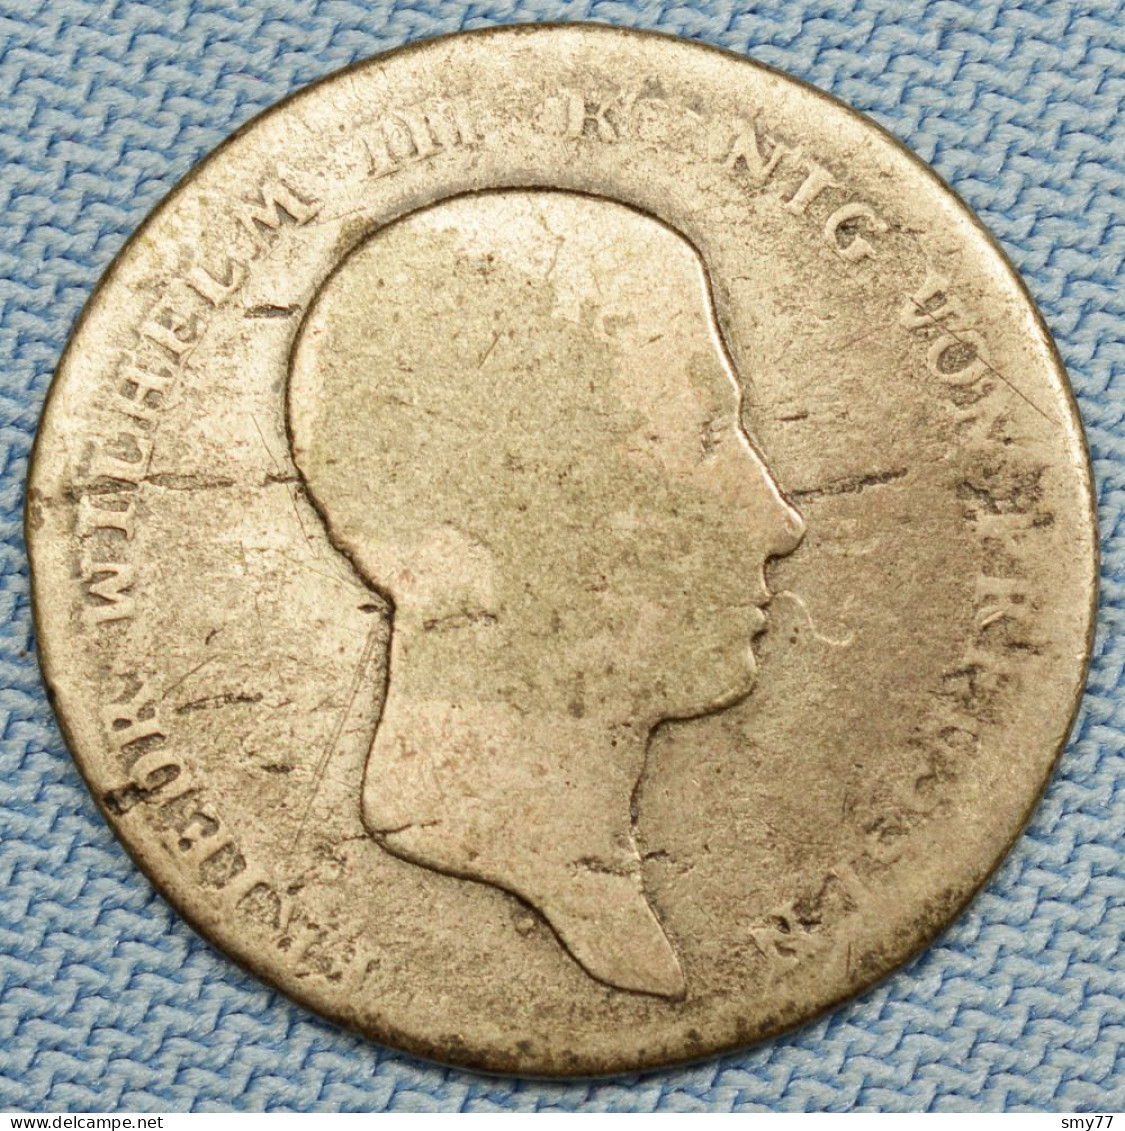 Preussen / Prussia • 1/6 Thaler 1813 A • Friedrich Wilhelm III • German States / Allemagne États / Prusse • [24-637] - Small Coins & Other Subdivisions